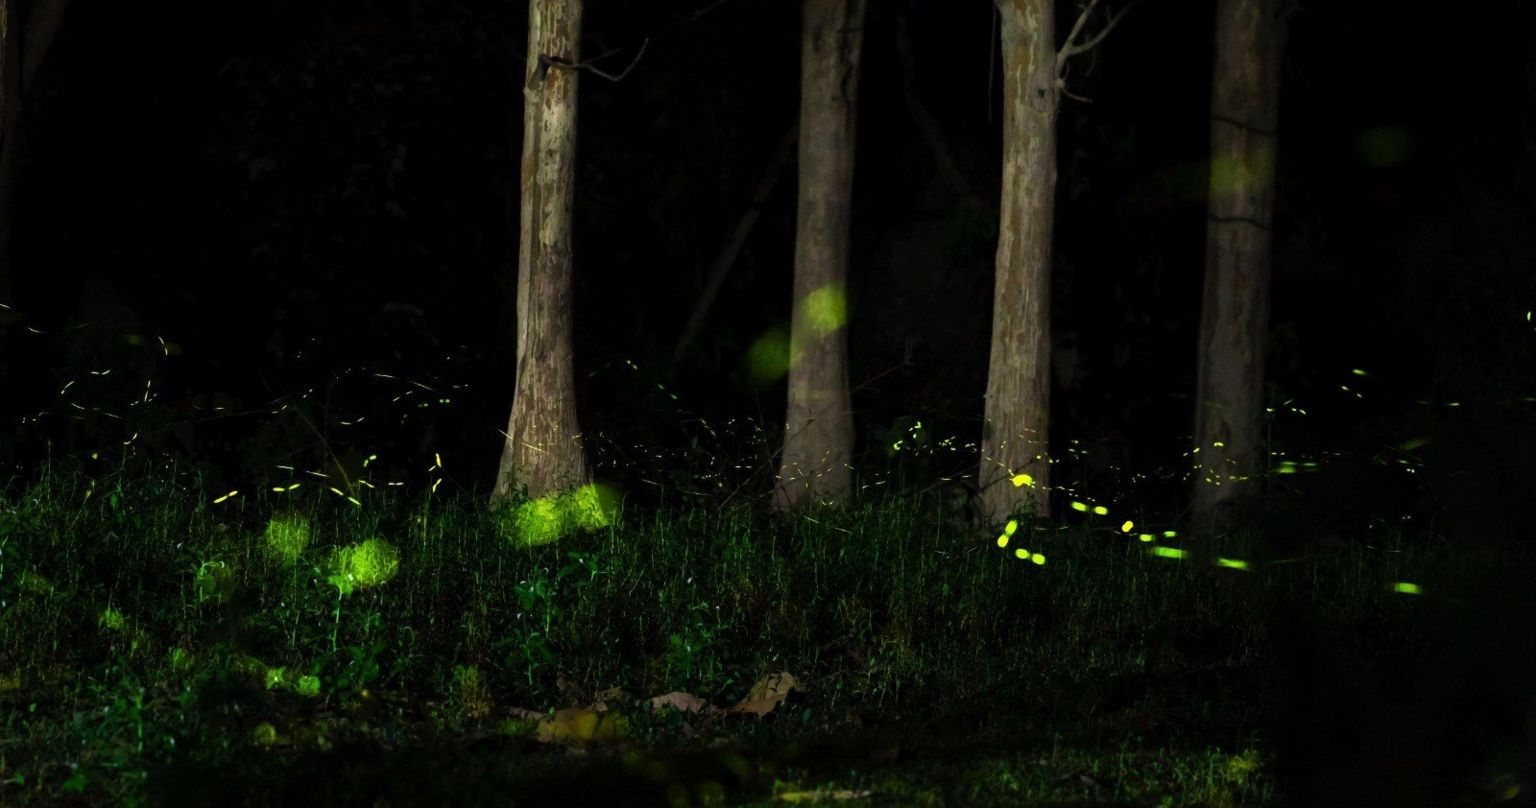 Fireflies glowing green in the night forest